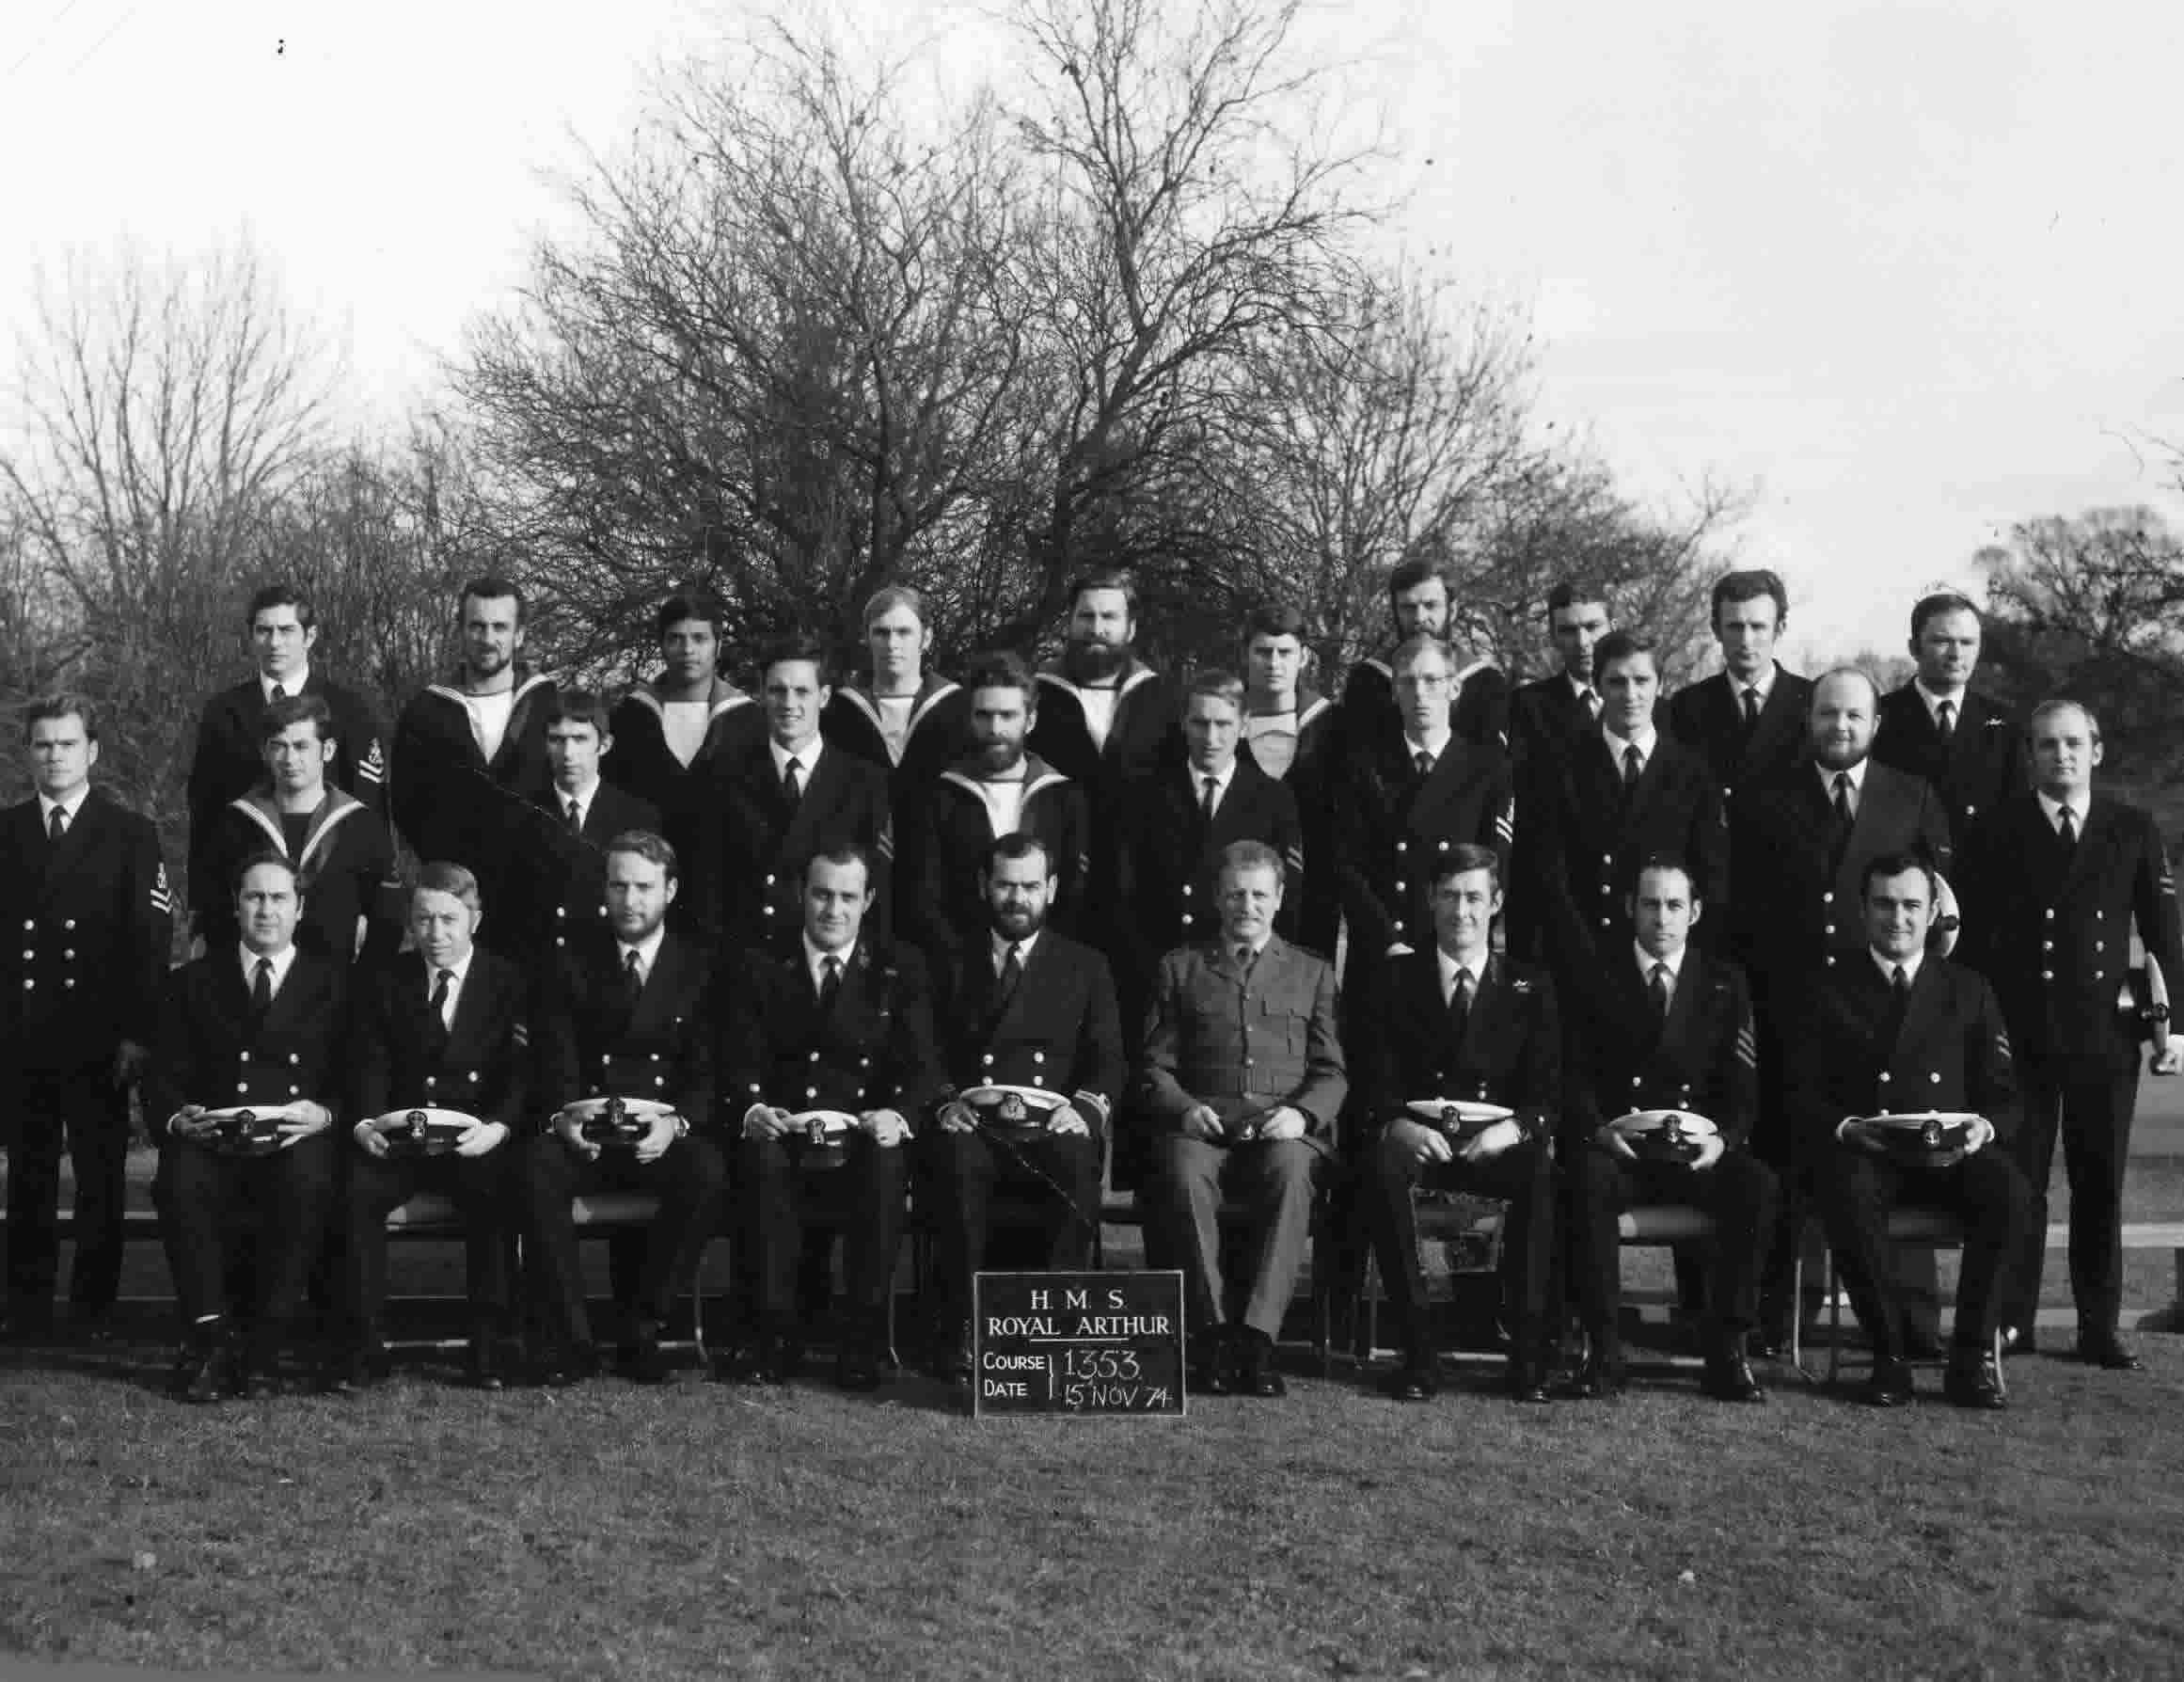 Middle row 2nd from right.